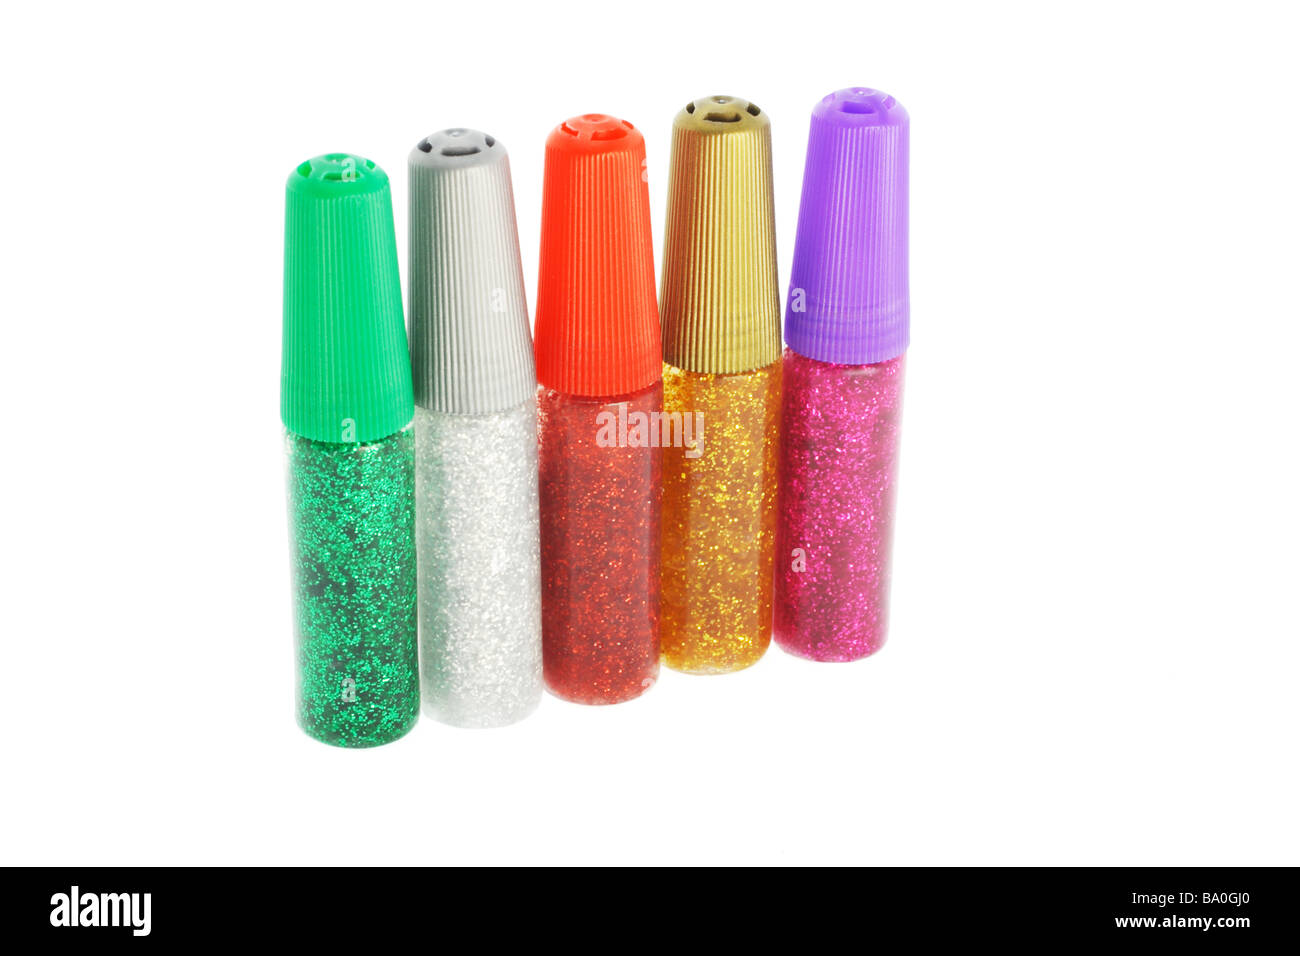 Five tubes of glitter glue of various colors on white background Stock Photo